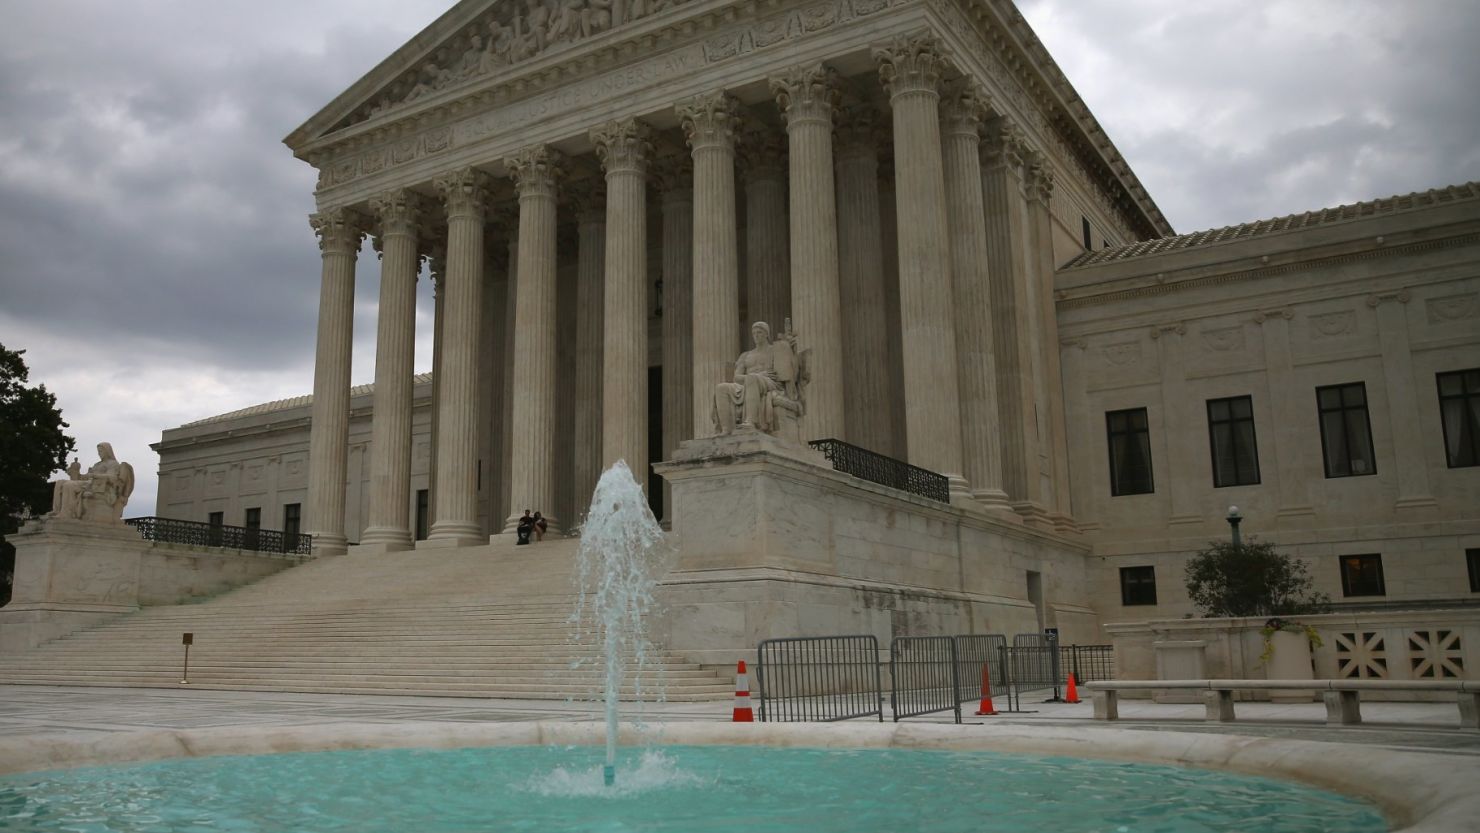 A fountain flows in front of the Supreme Court Building, August 20, 2014 in Washington, DC.